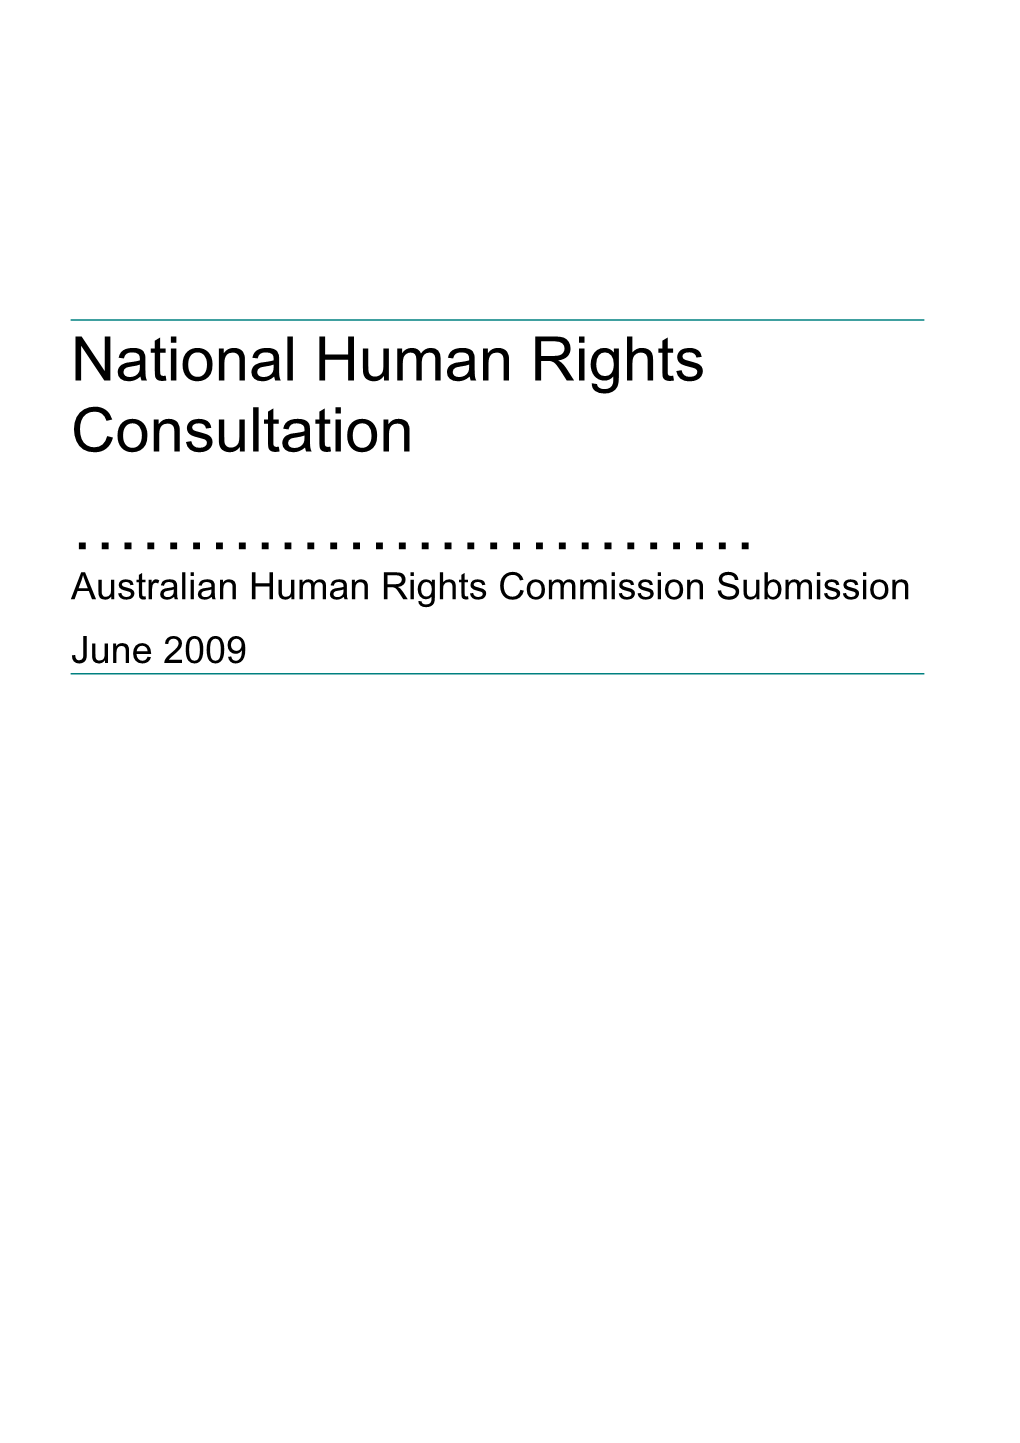 National Human Rights Consultation